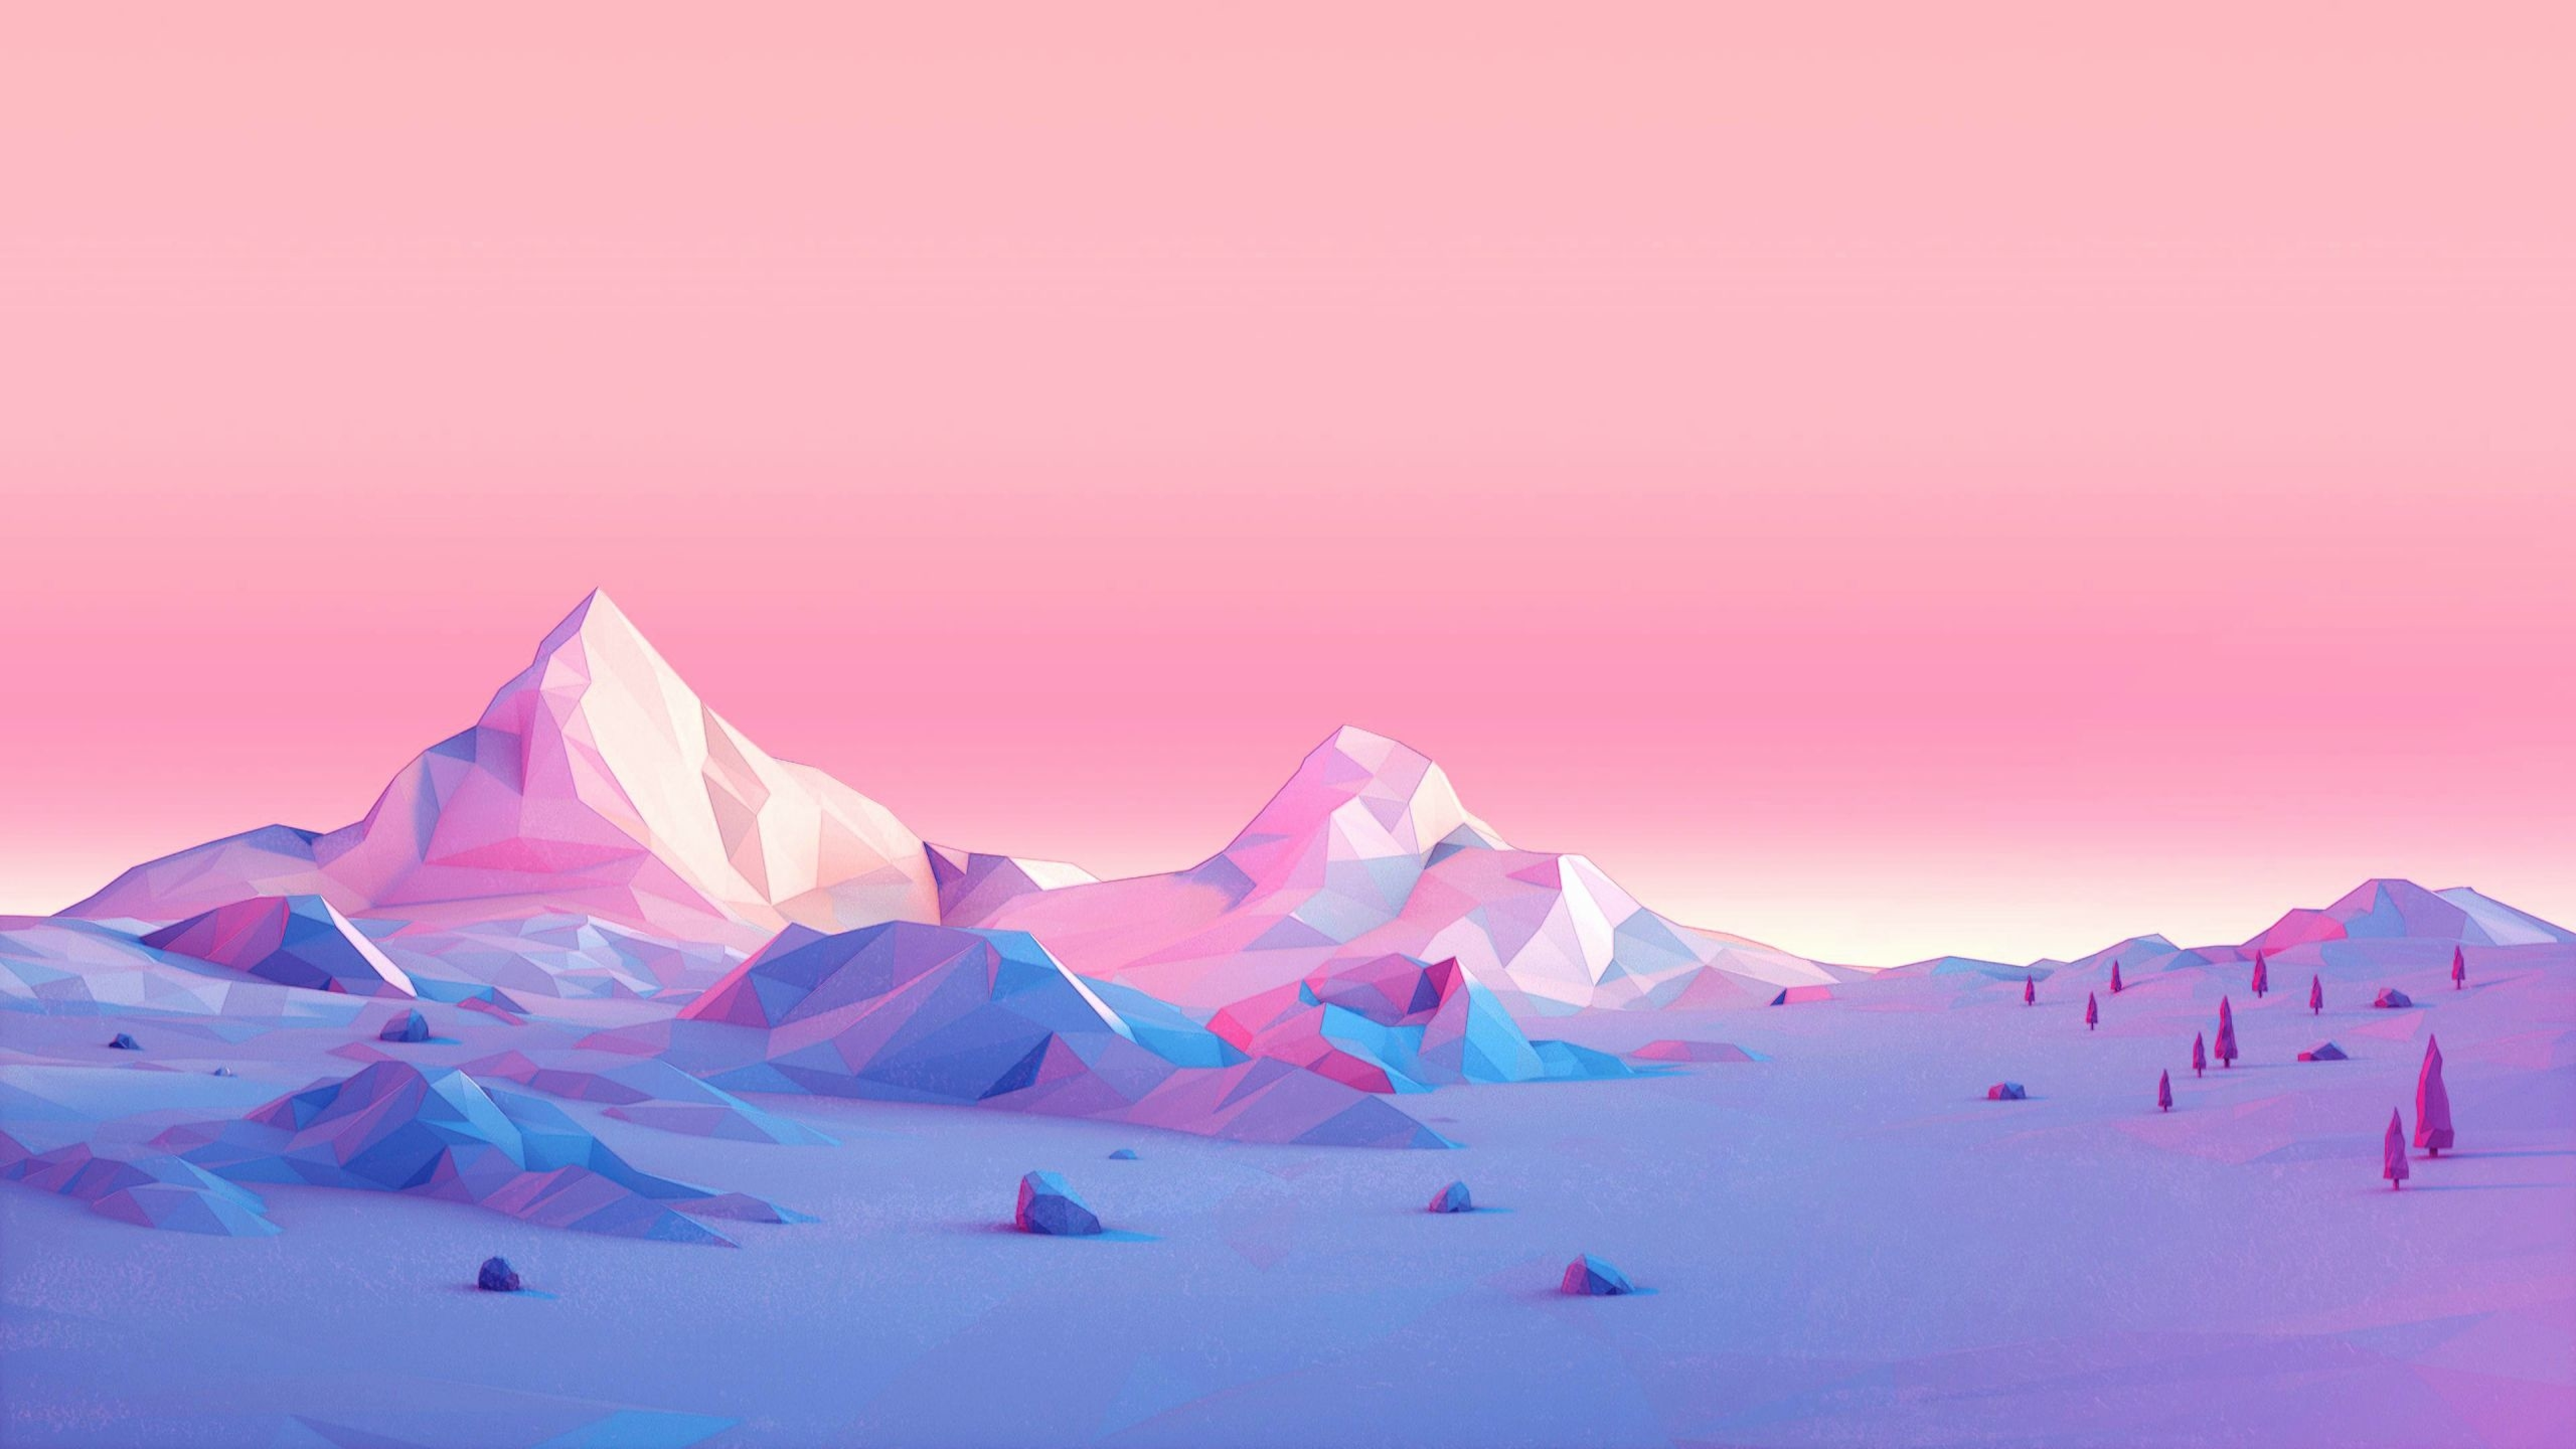 7680x4320 Resolution Low Poly Mountains 8K Wallpaper - Wallpapers Den